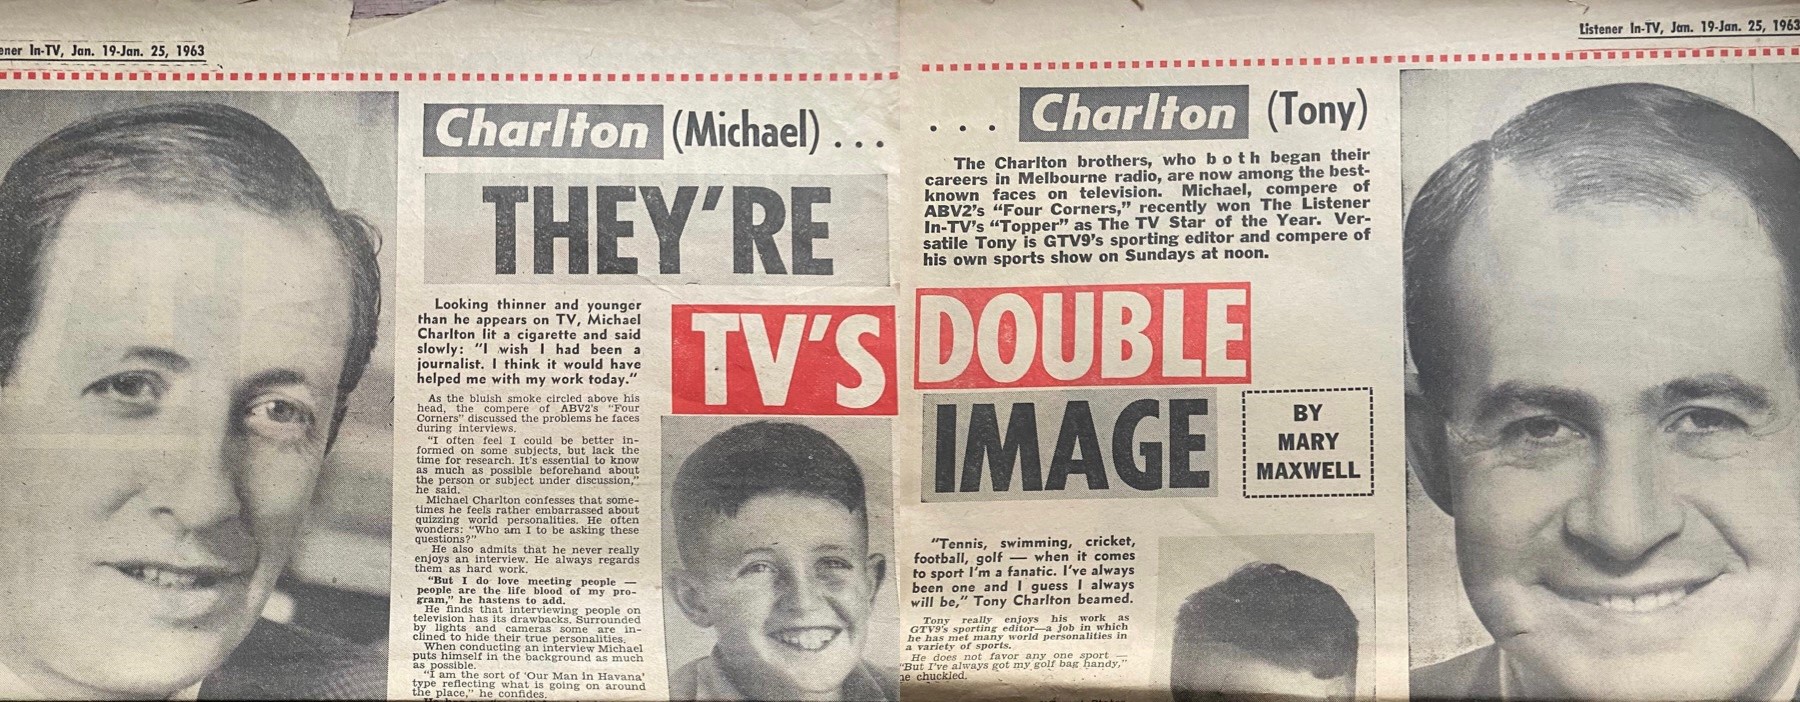 Old newspaper article with photos of Tony and Michael and headline "They're TV's double image".